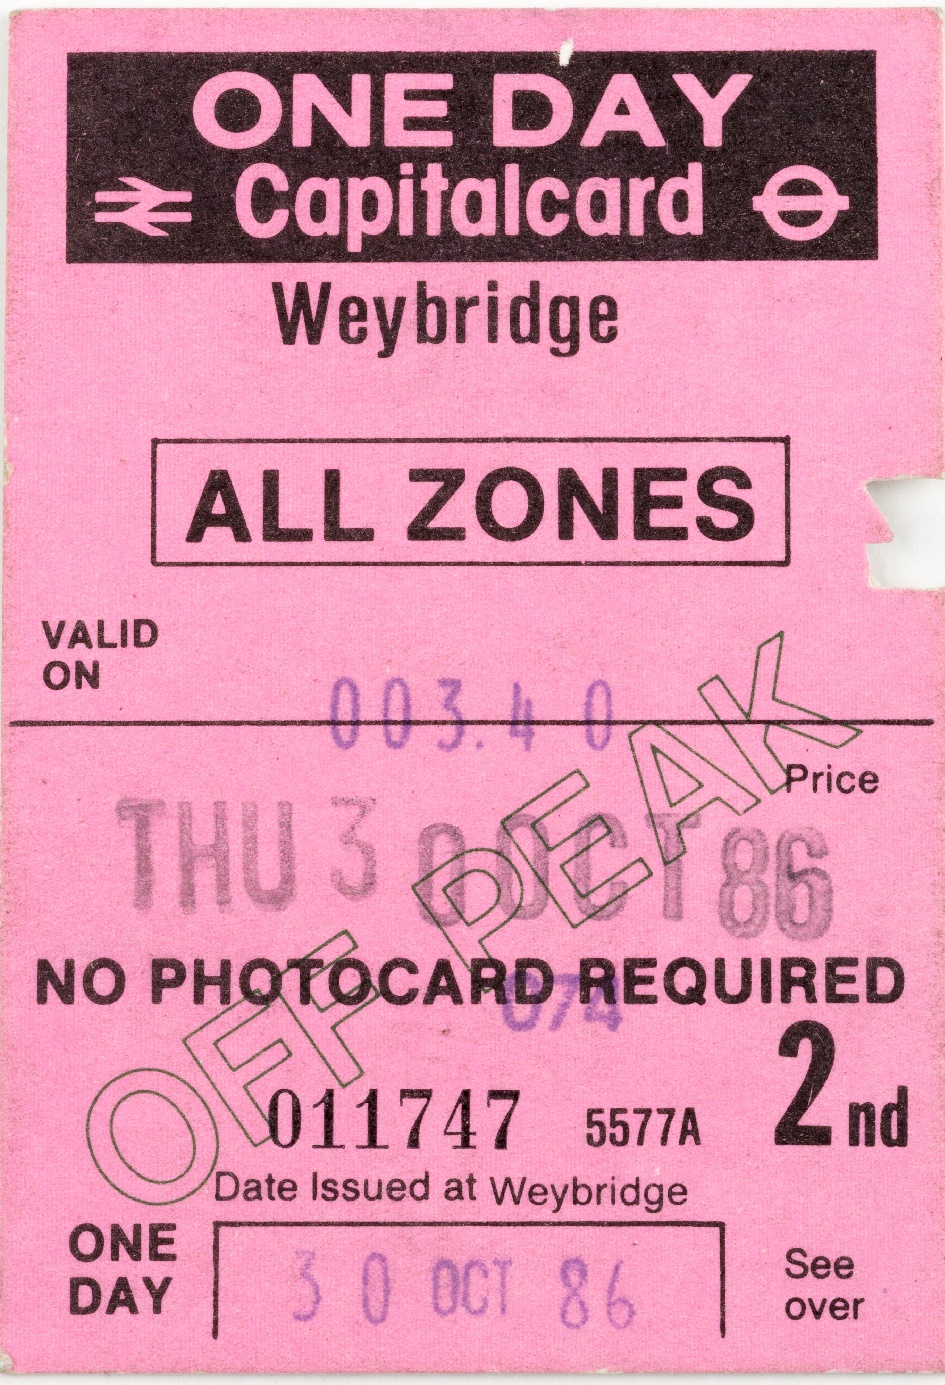 One day capital card issued at Weybridge station for all zones of British rail, valid on Thursday 30th October 1986.